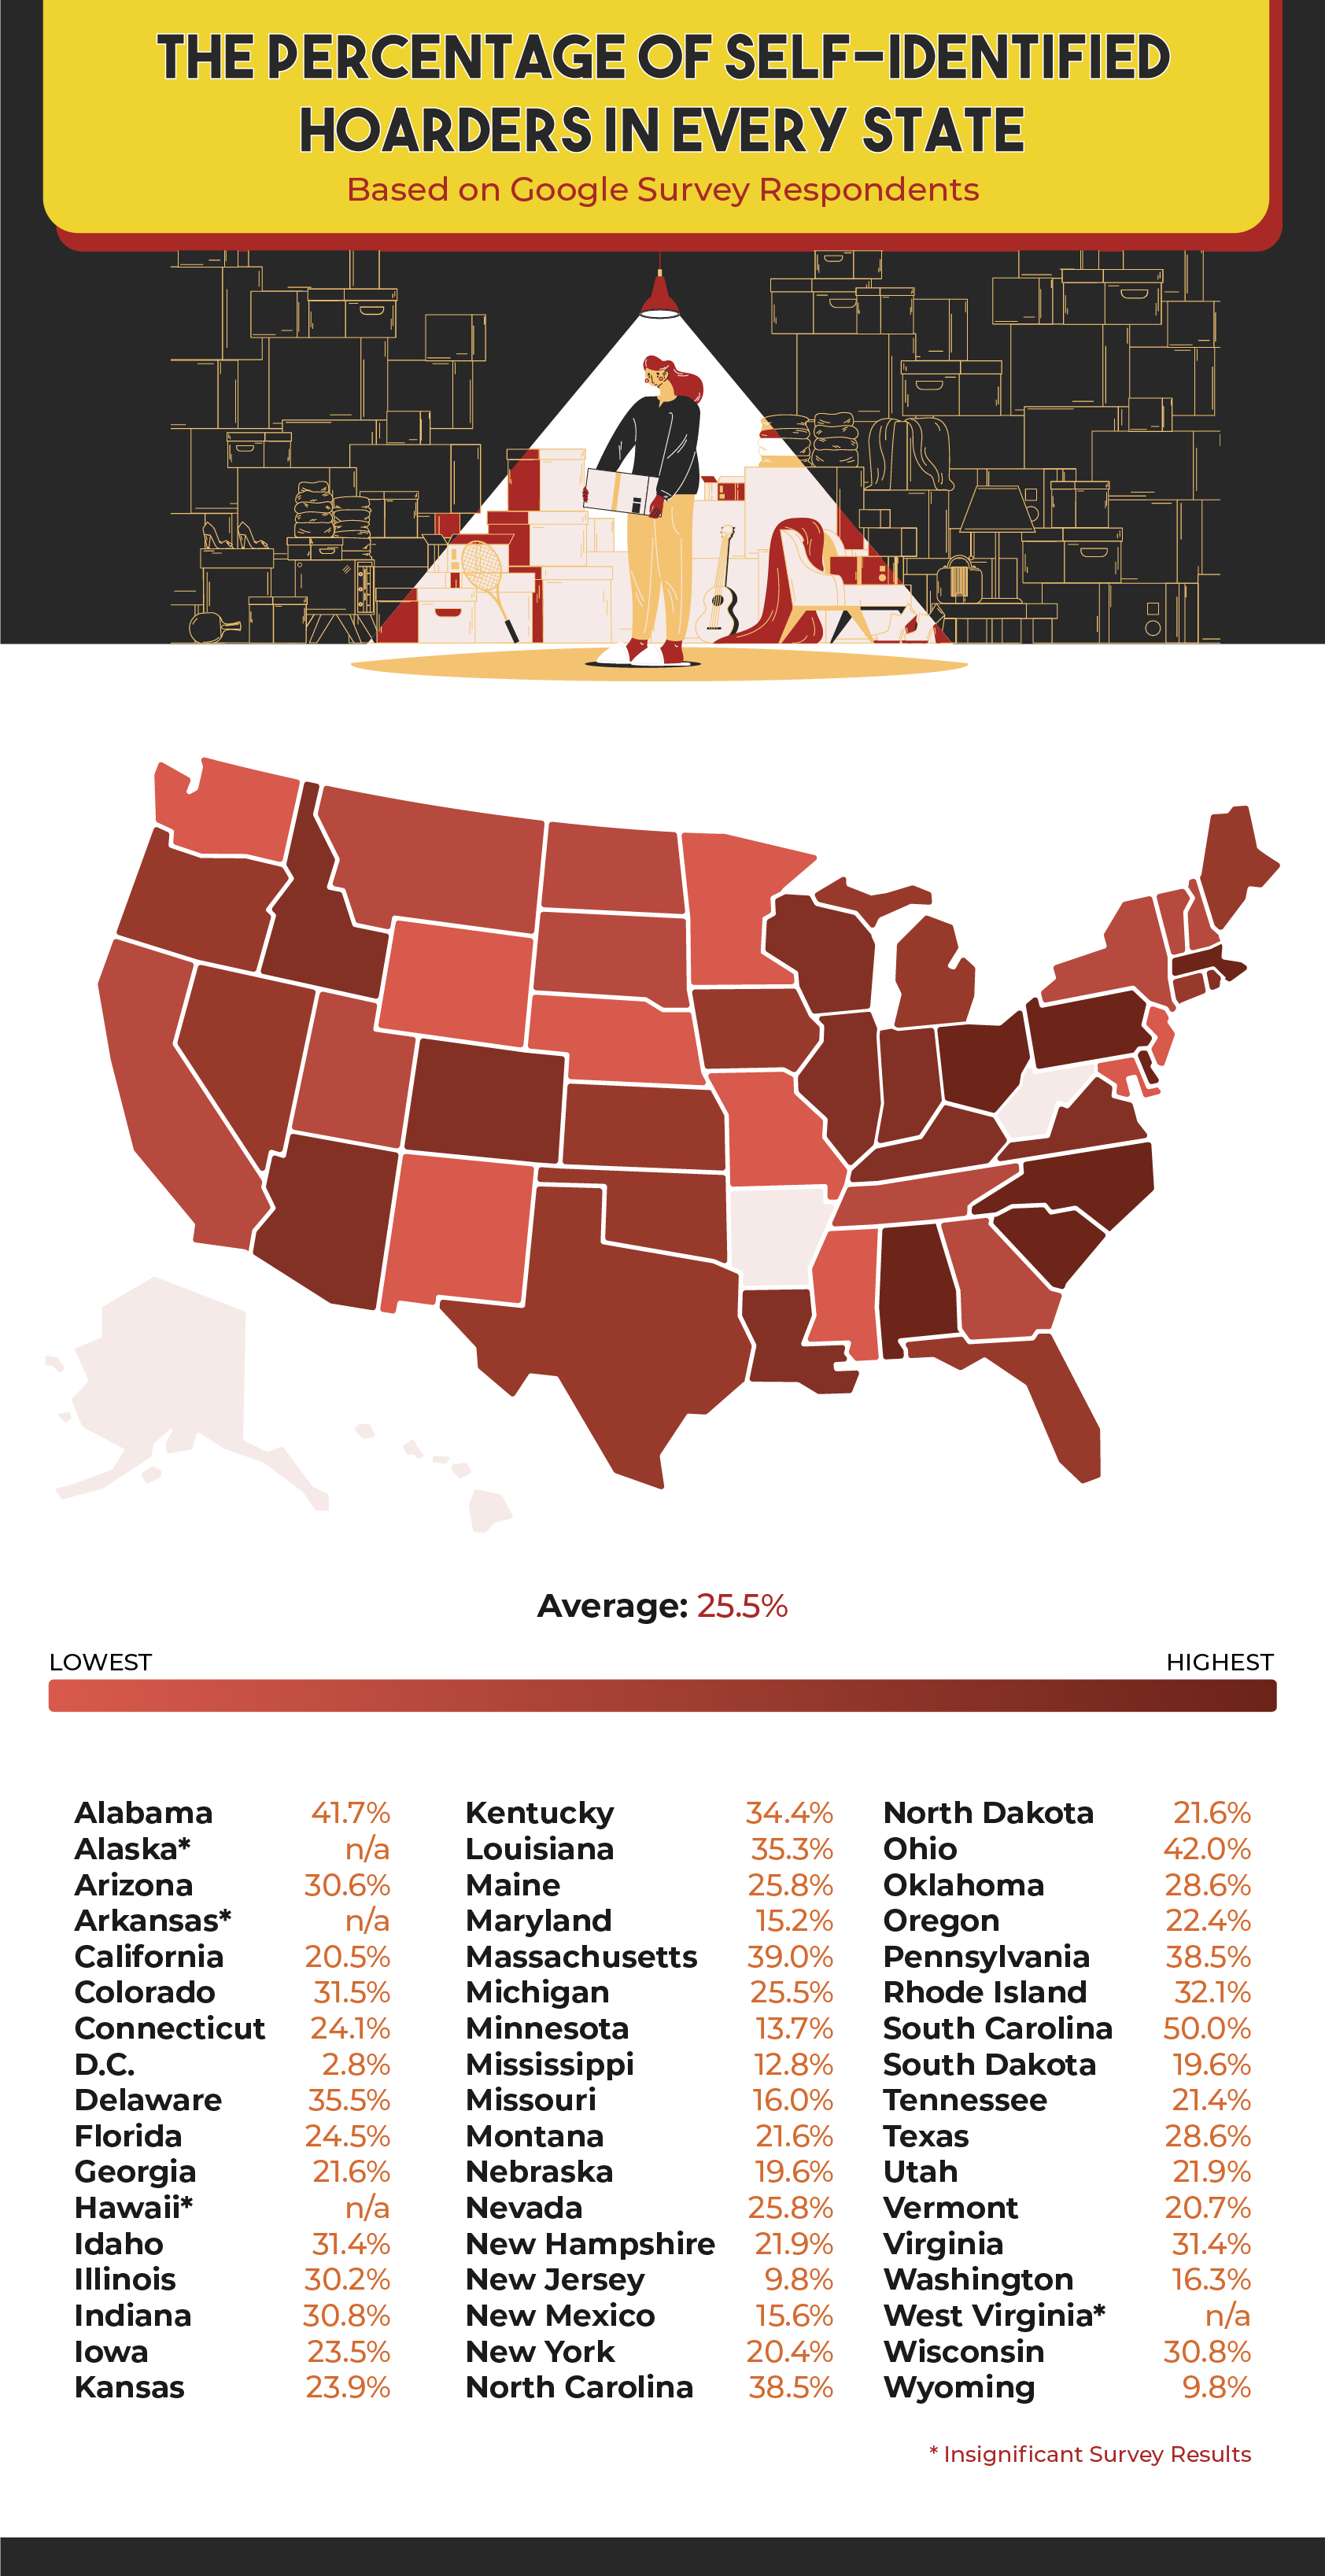 Map of US that shows percentage of self-identified hoarders in every state